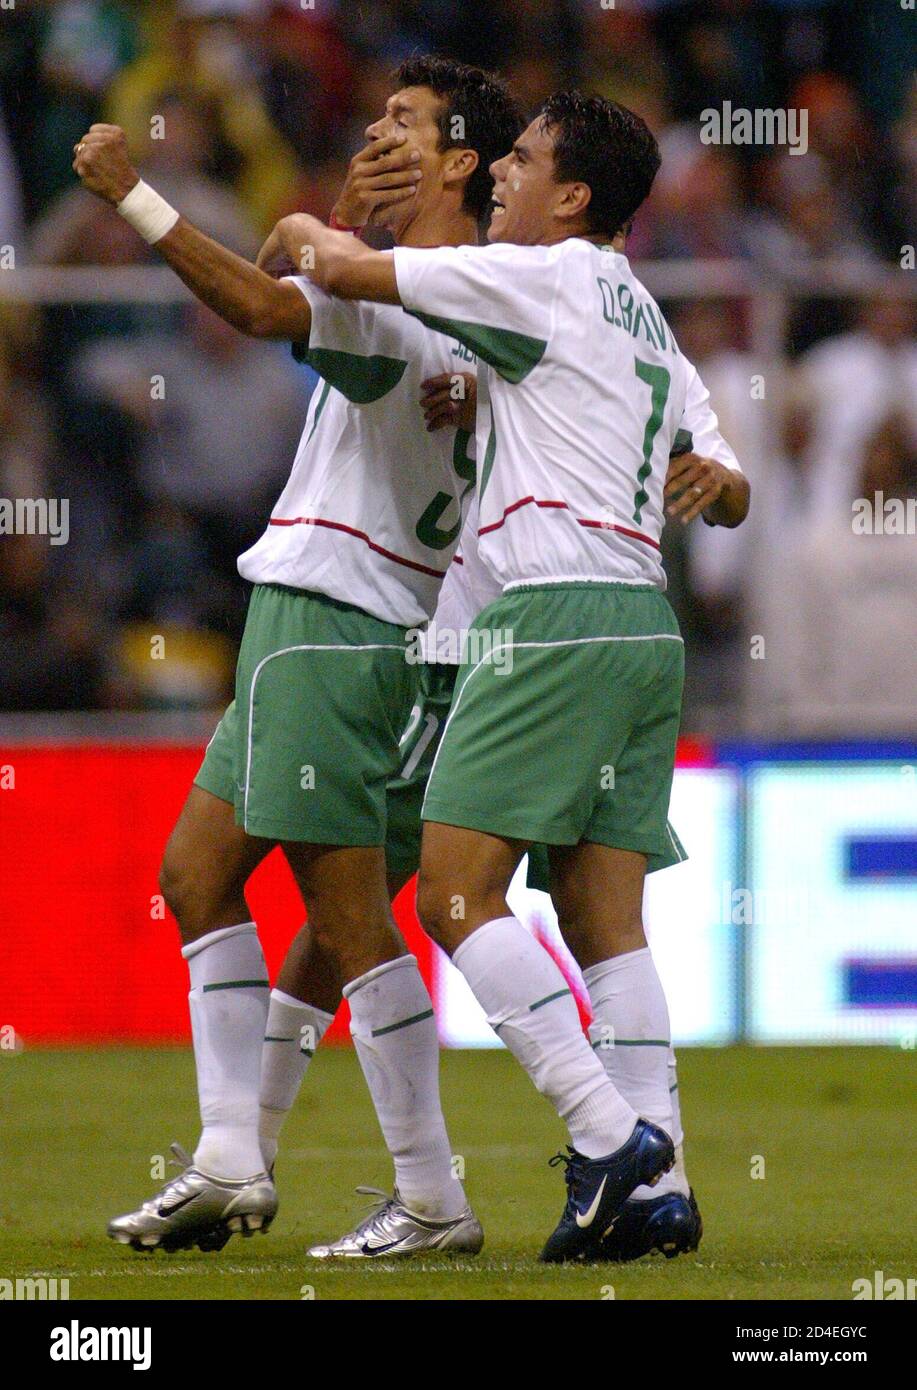 Mexico's striker Jared Borgetti (L) celebrates his first goal with teammate  Omar Bravo(7) against Costa Rica during the first half of their 2003  Confederation of North, Central American and Caribbean Association Football  (